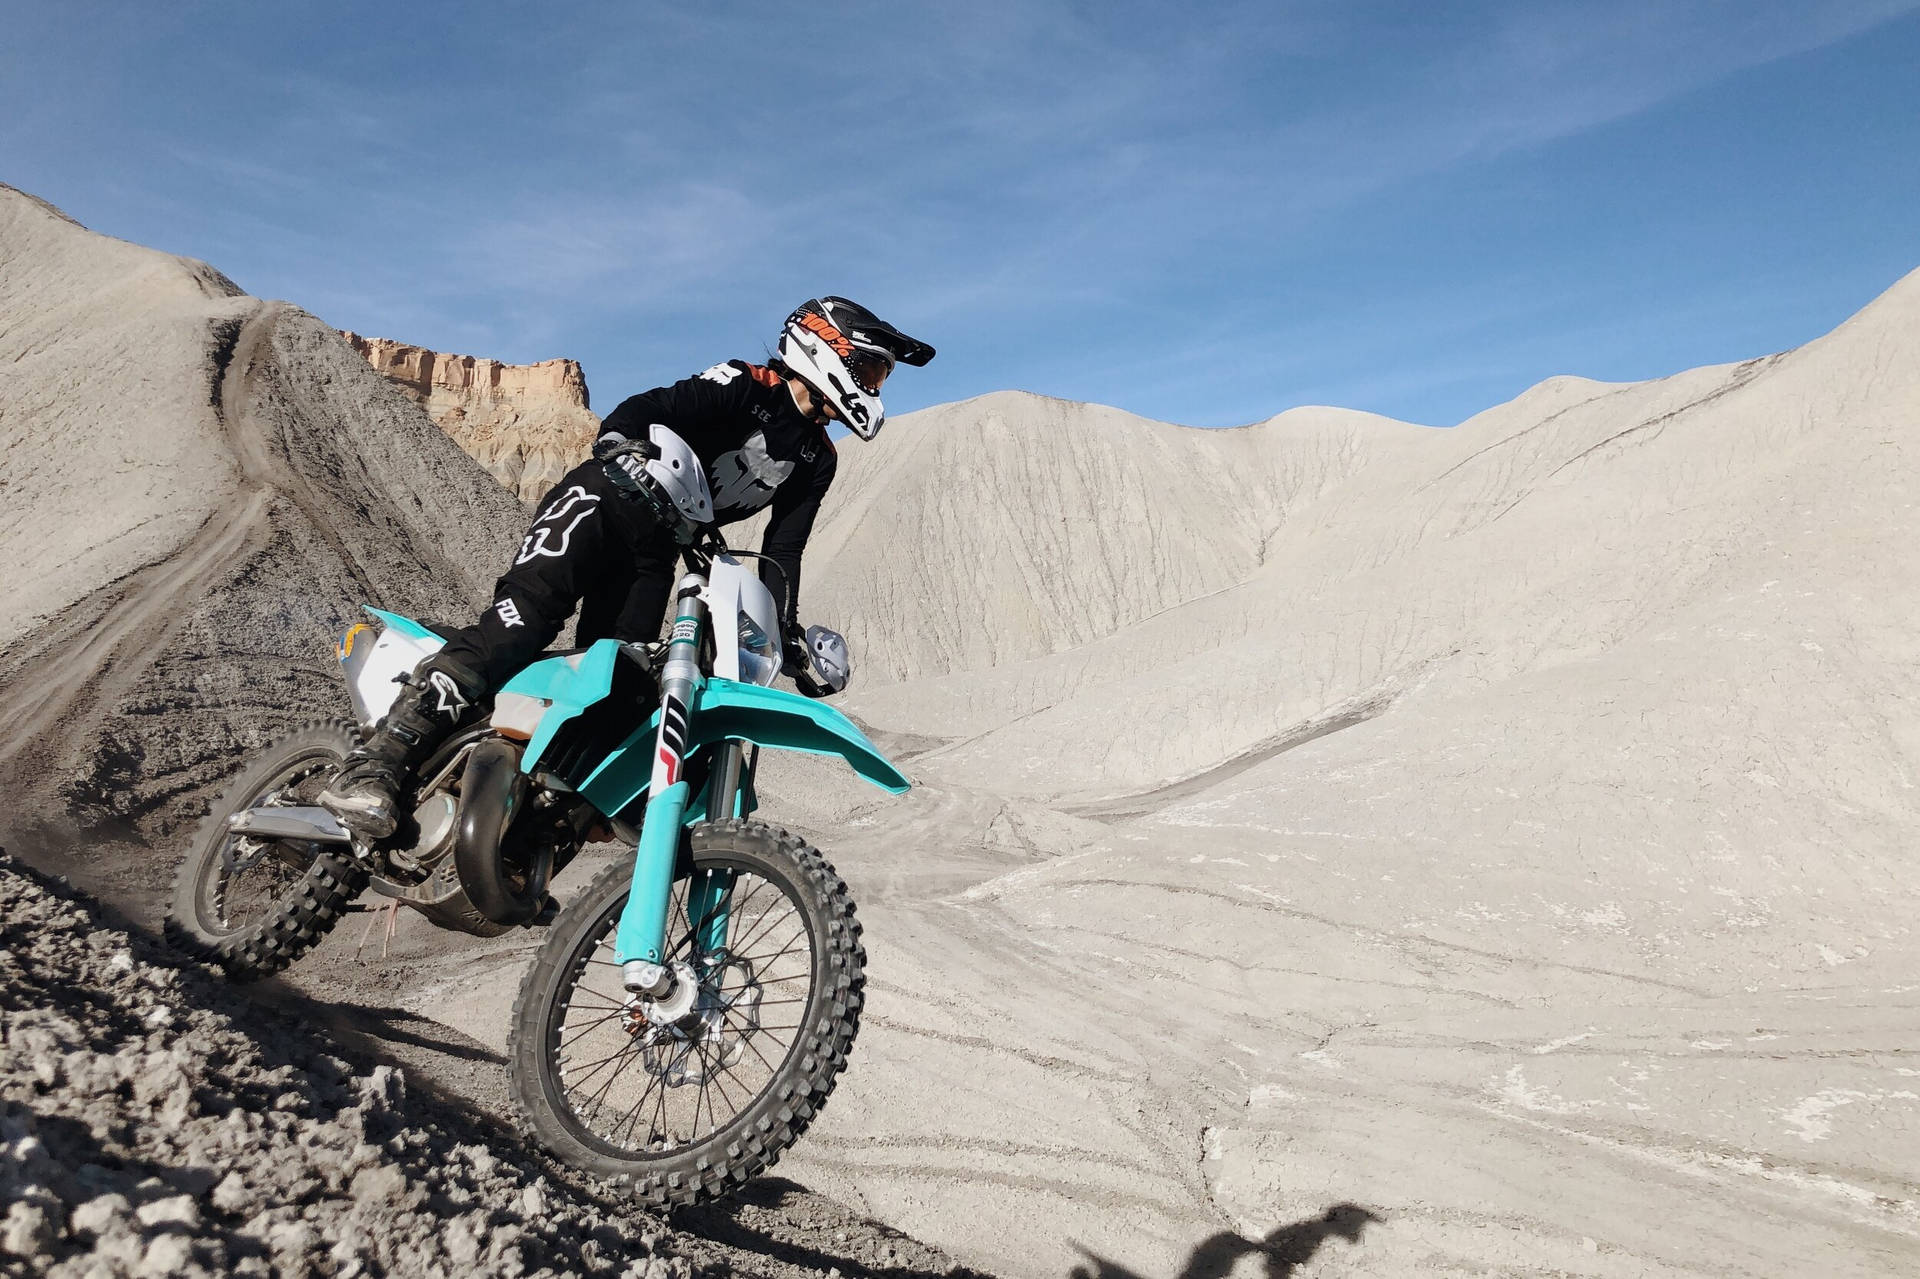 Explore the world of adventure on your own terms with a Fox Dirt Bike Wallpaper